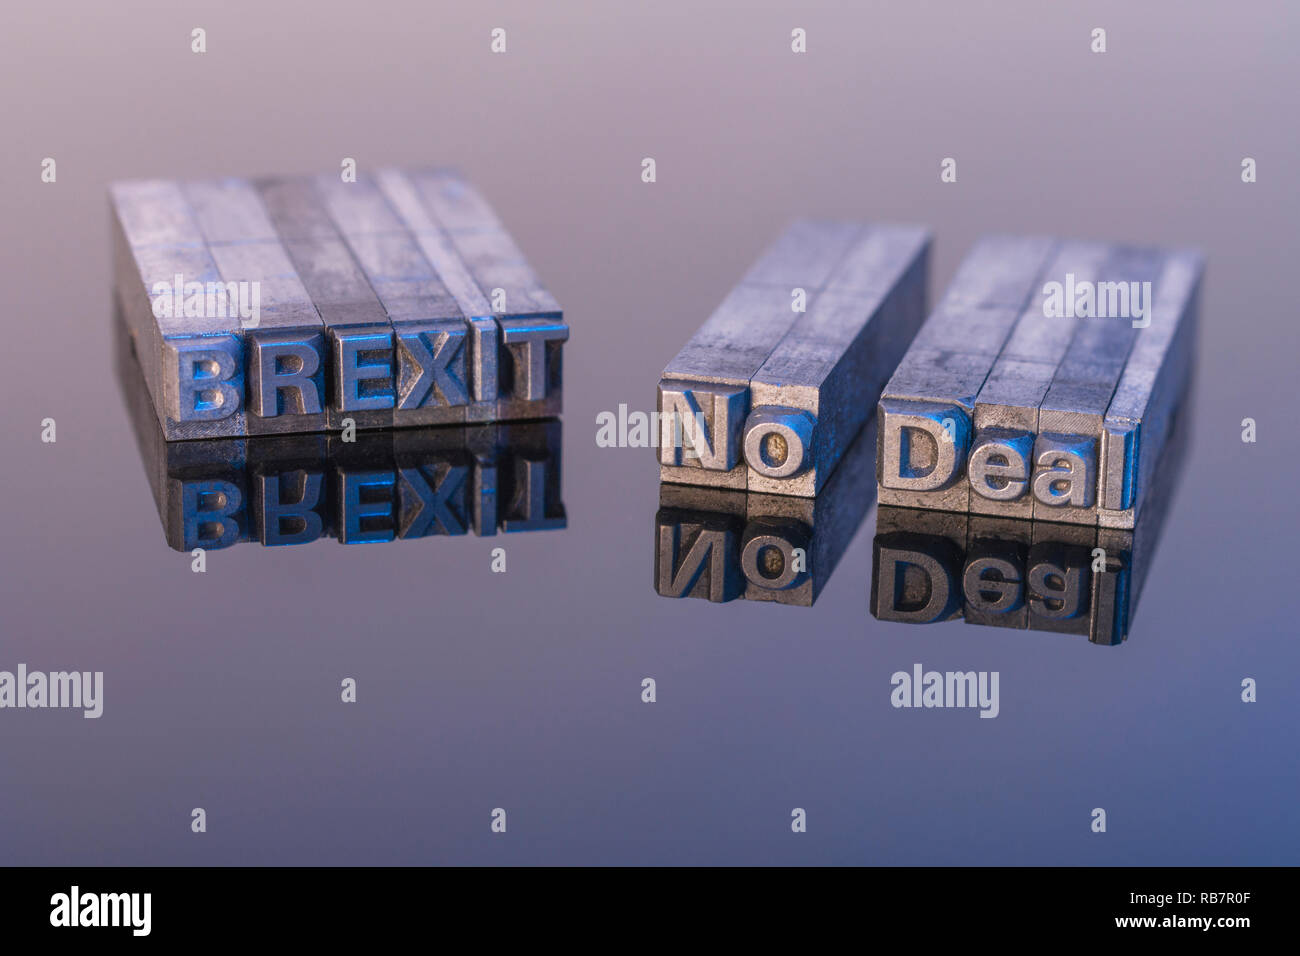 'No Deal' Brexit spelled out in printer's typeface on reflective black surface. Metaphor UK's Brexit endgame & No-Deal Brexit scenario. See Notes Stock Photo